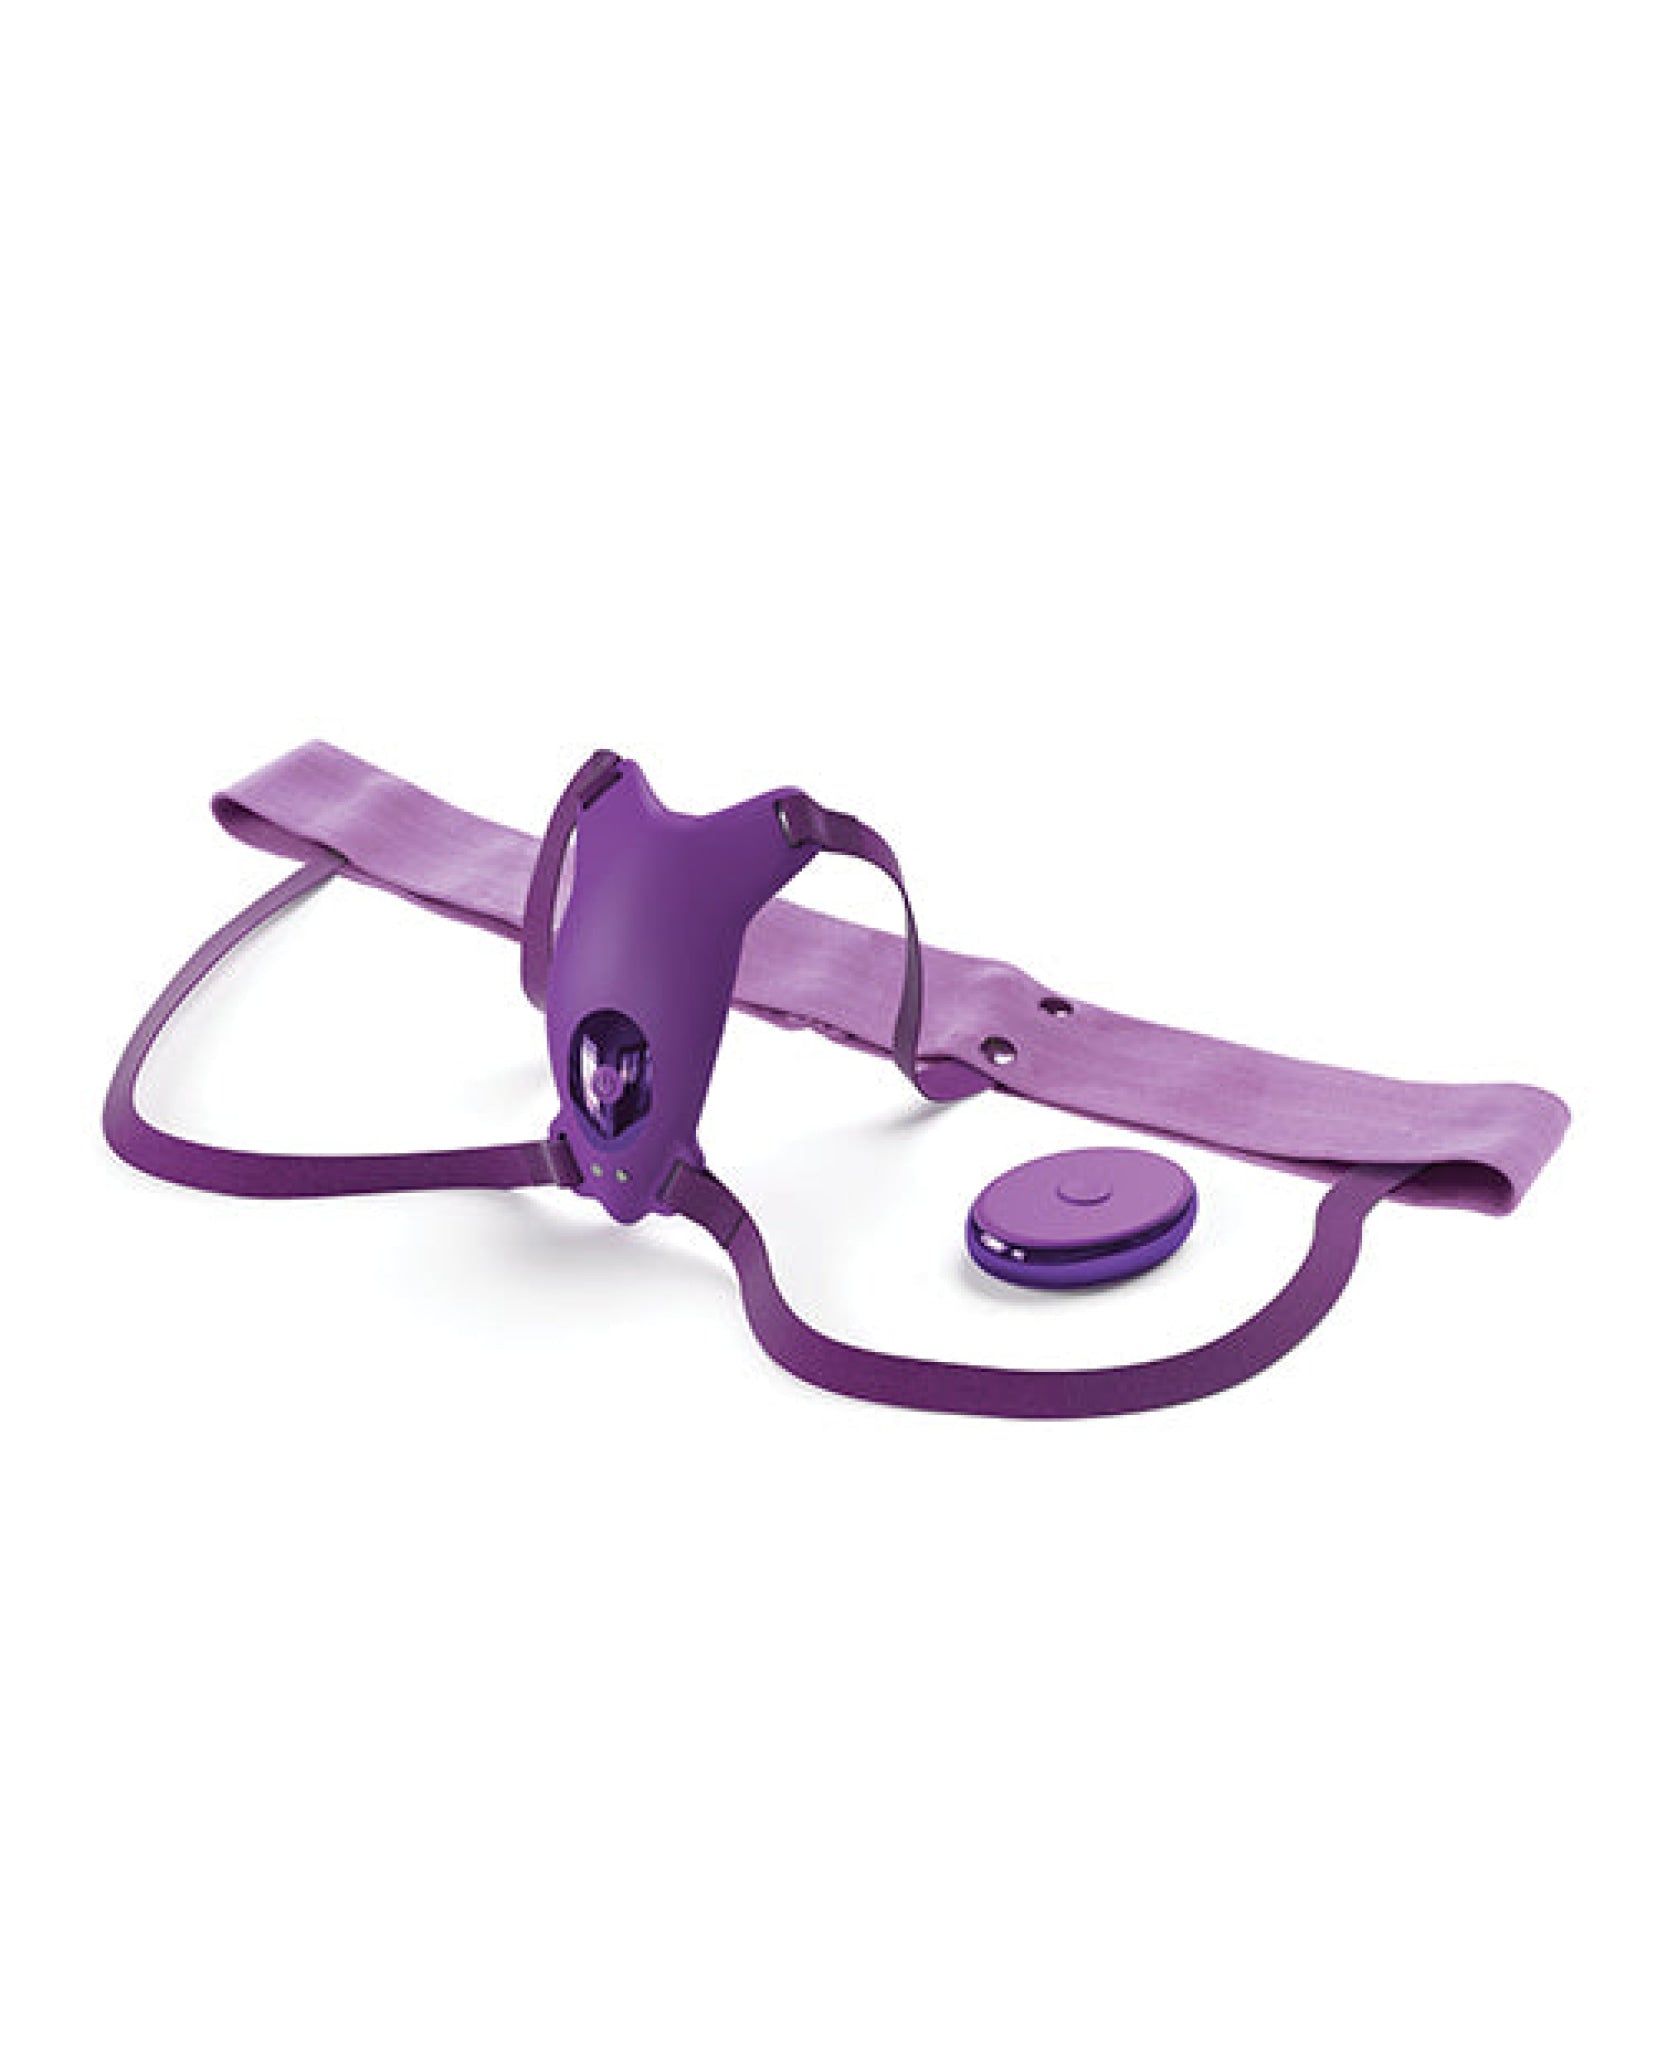 Fantasy For Her Ultimate Butterfly Strap On - Purple Pipedream®